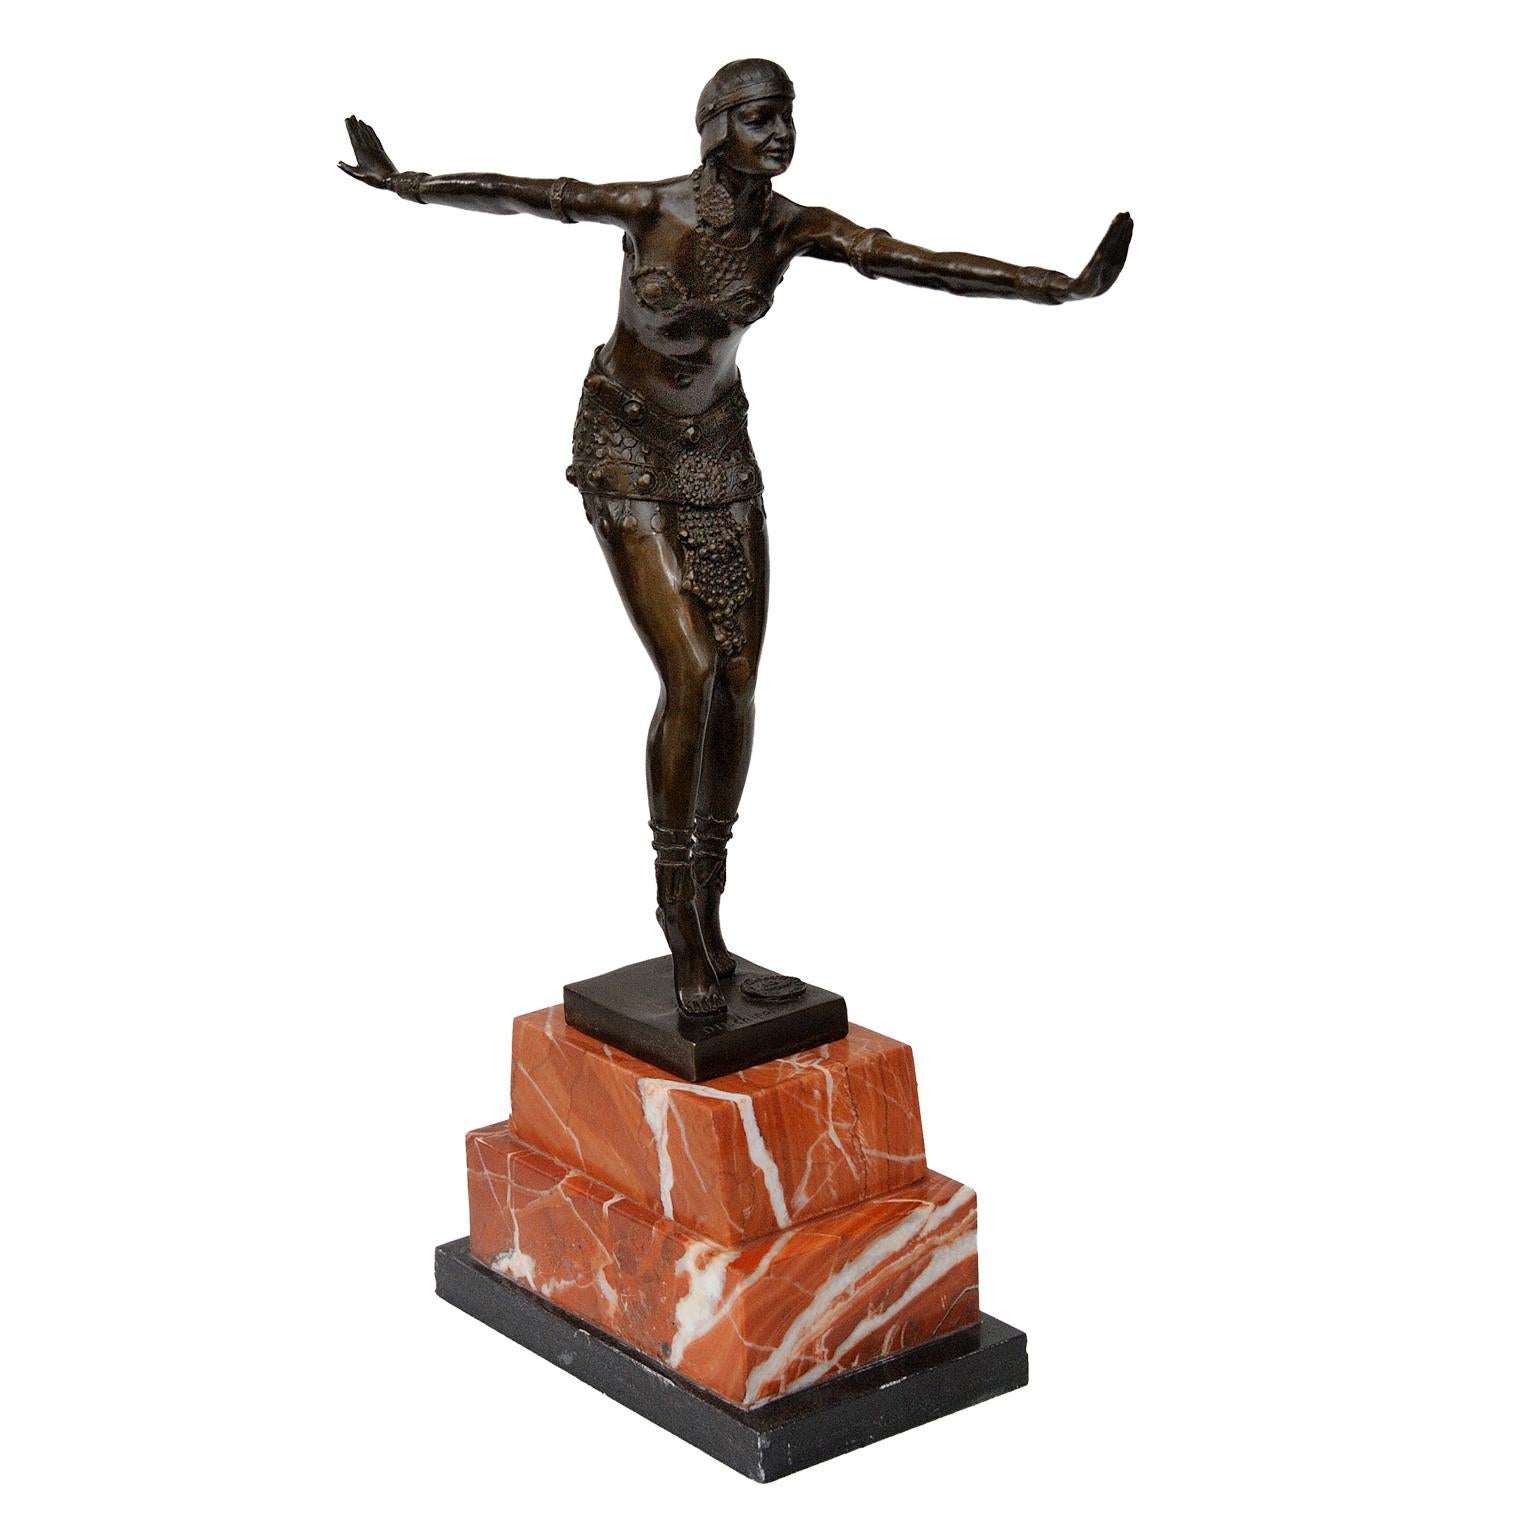 This is a most pleasing contemporary Art Deco style bronze of a dancer, standing on a stepped marble base, after DH Chiparus. With engraved signature and bearing stamp 'Bronze Garanti Paris J.B. Deposee'. Bearing the number A7255. 

A lovely